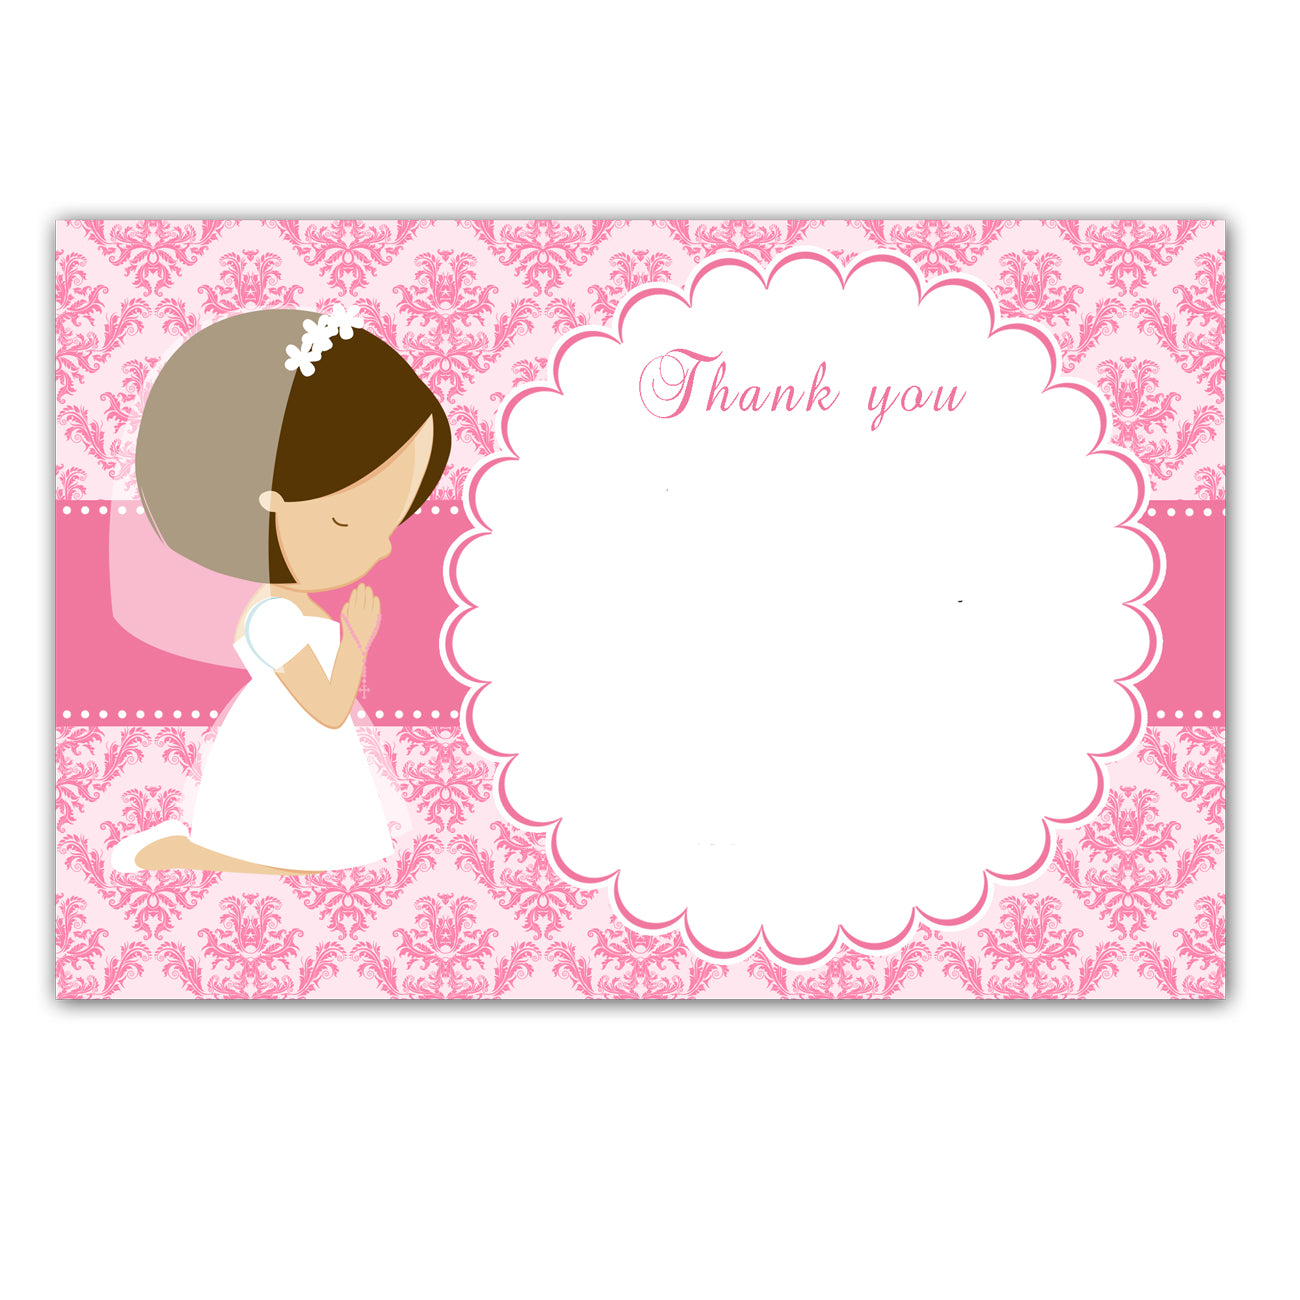 30 Religious blank thank you cards pink